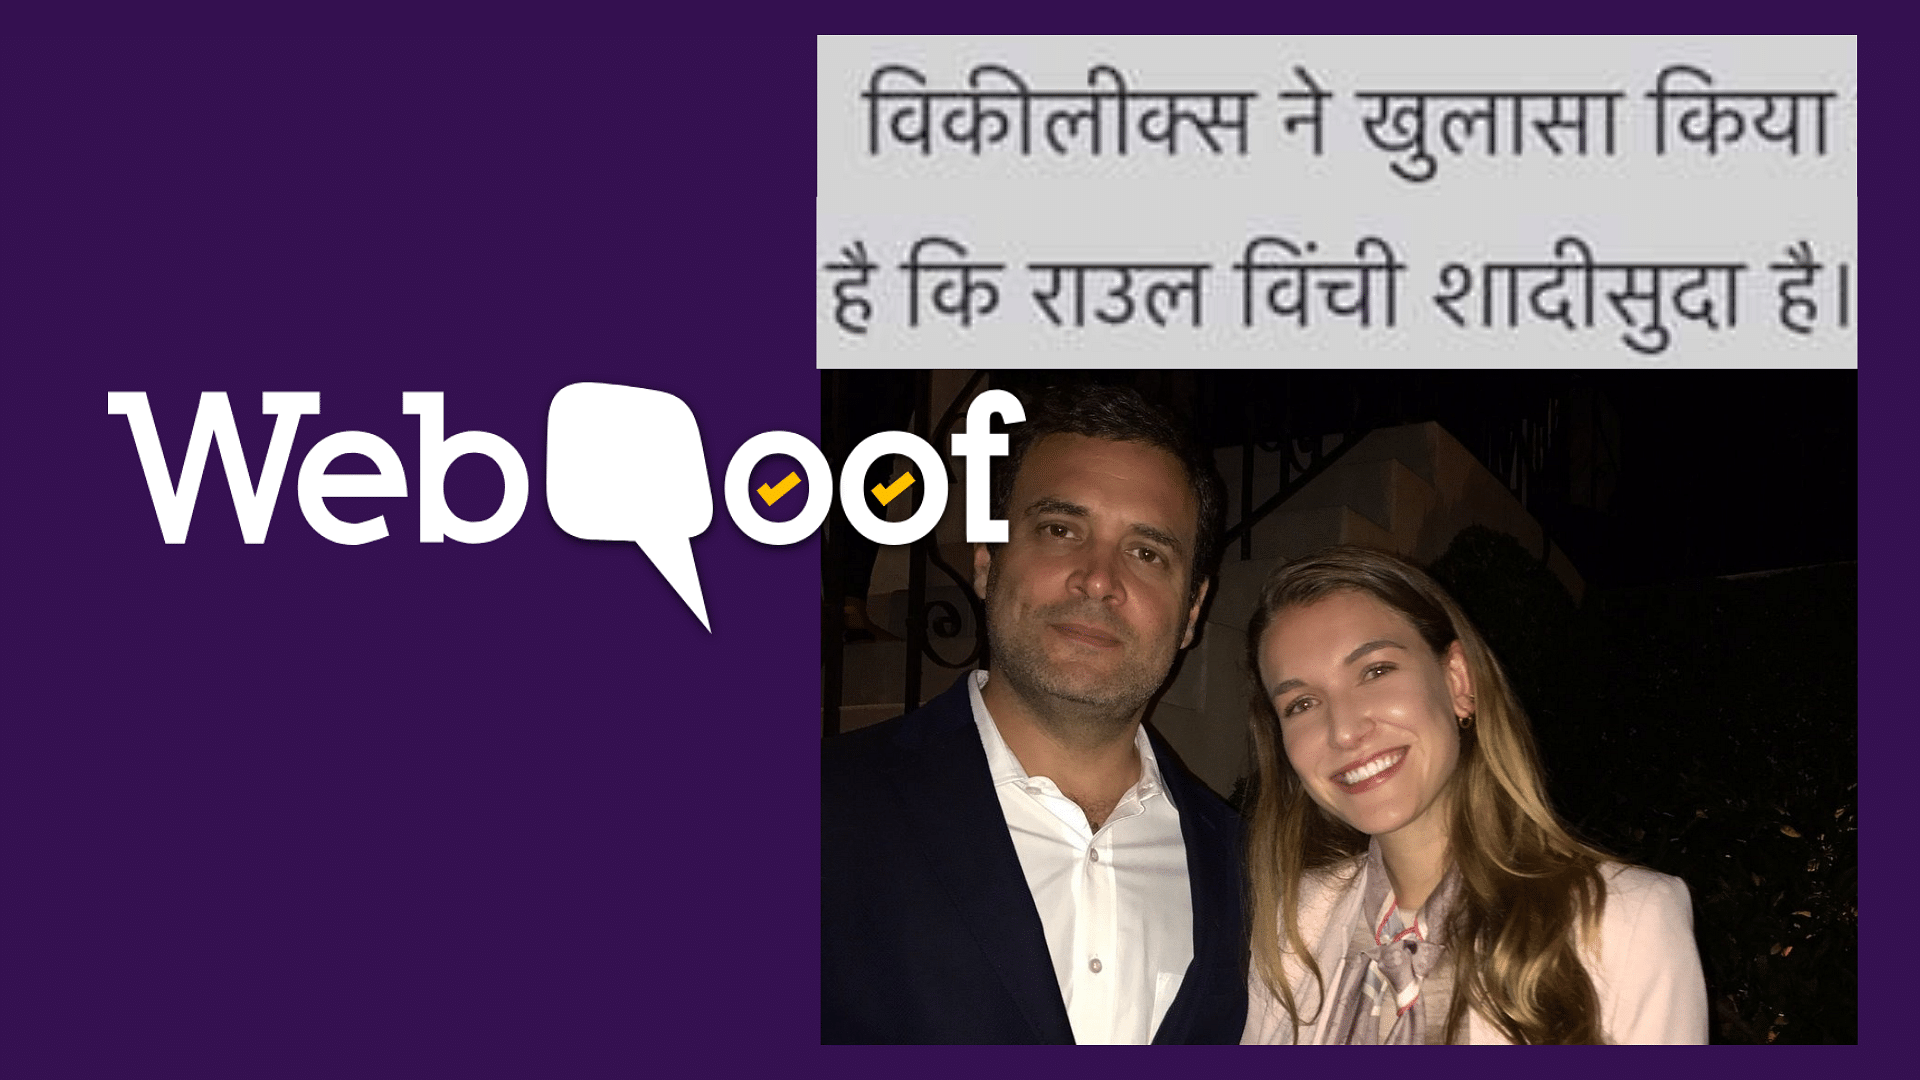 Viral posts claim that Rahul Gandhi is married to a Colombian woman and has two children living in London.